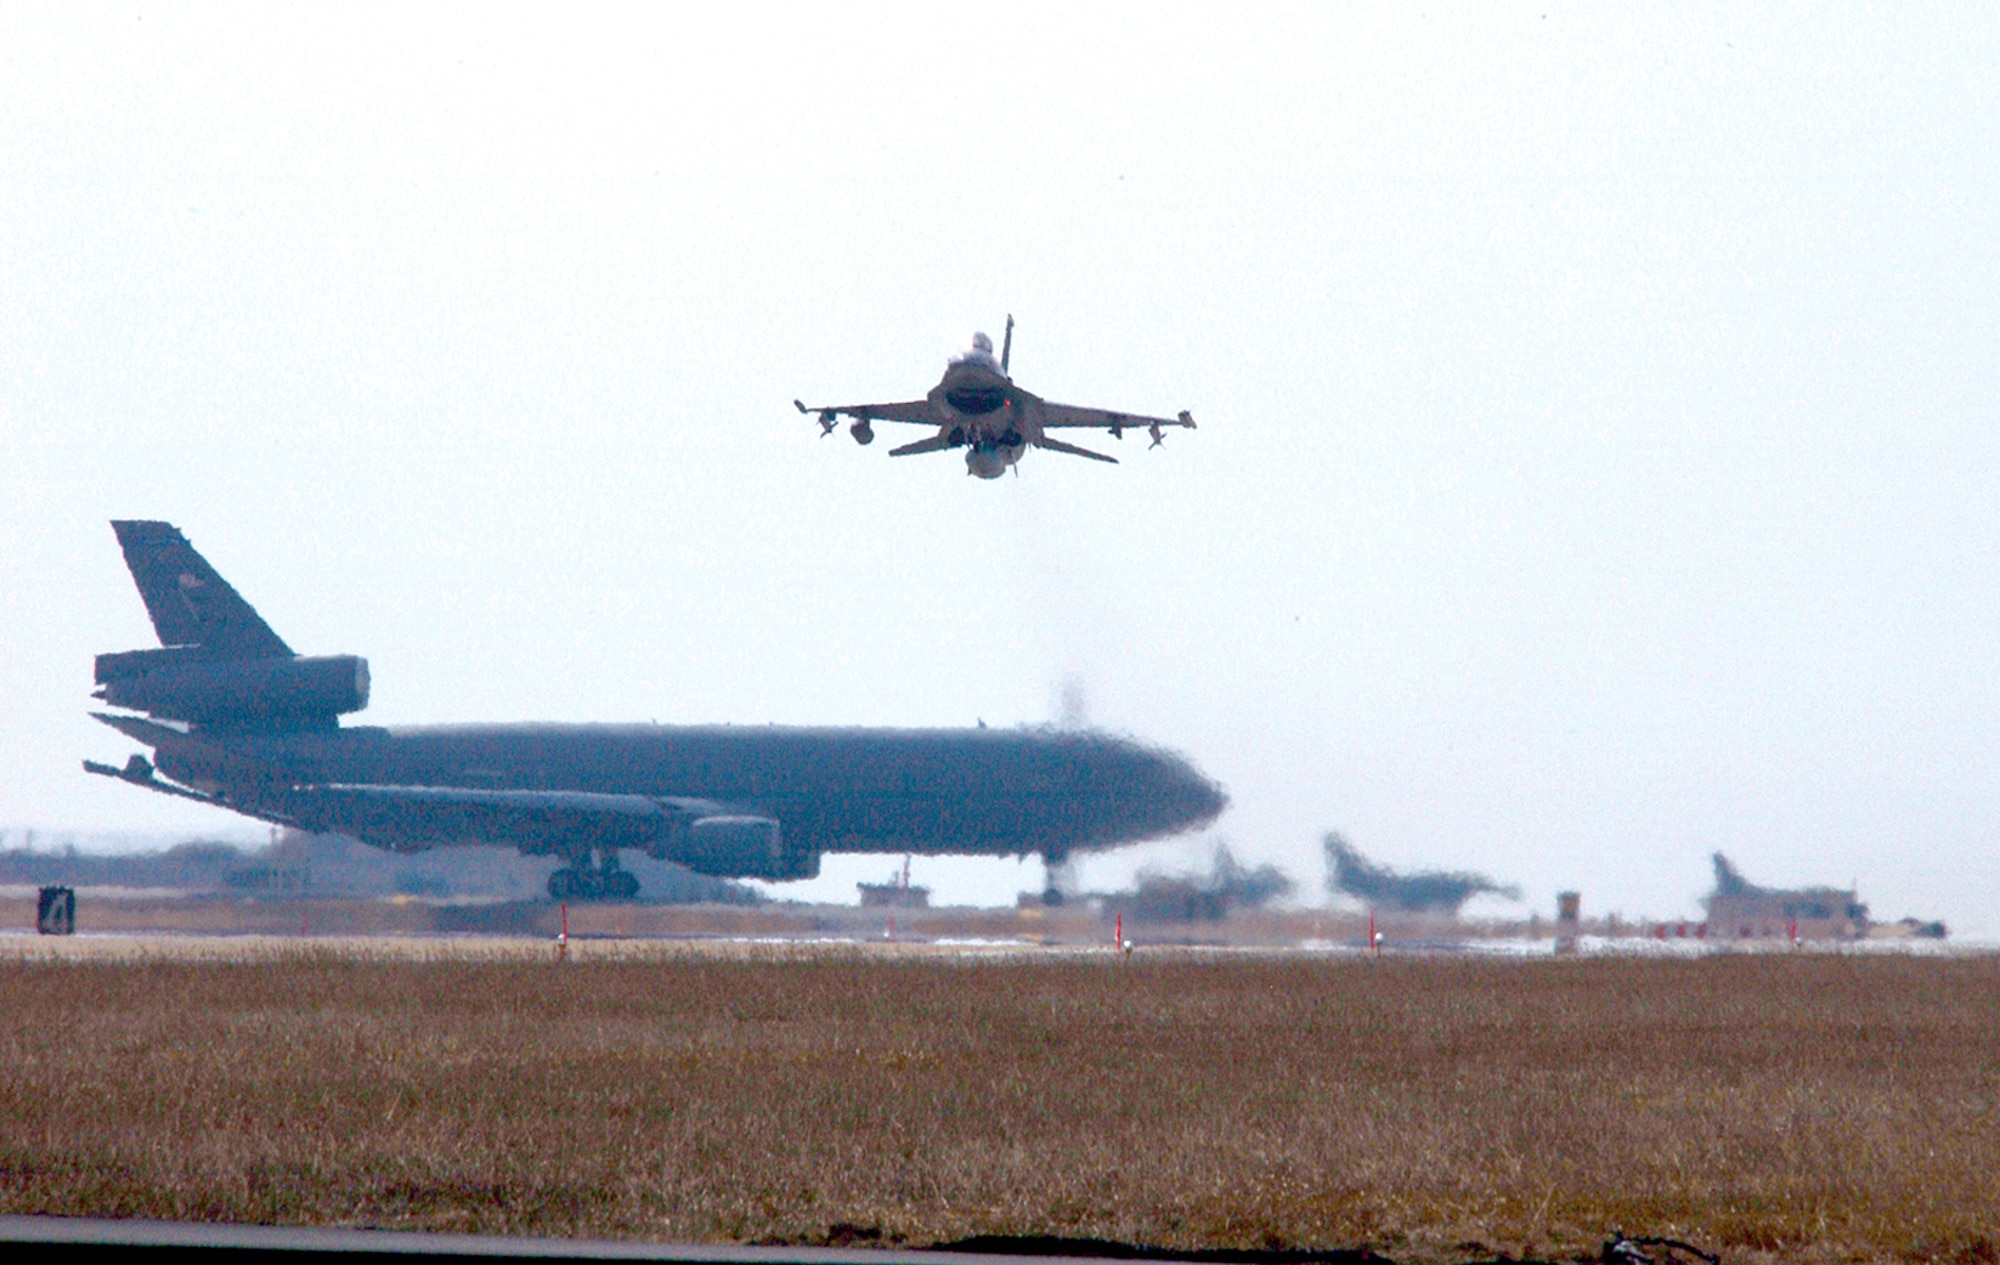 An F-16 Fighting Falcon from the 80th Fighter Squadron lifts off over waiting F-16s and a KC-10 Extender at Kunsan Air Base, South Korea, Thursday, March 2 2006. The 80th FS and 80th Aircraft Maintenance Unit deployed to Singapore Operation Commando Sling, a month-long joint training exercise between the U.S. and Singapore. (U.S. Air Force photo/Senior Airman Joshua Demotts) 